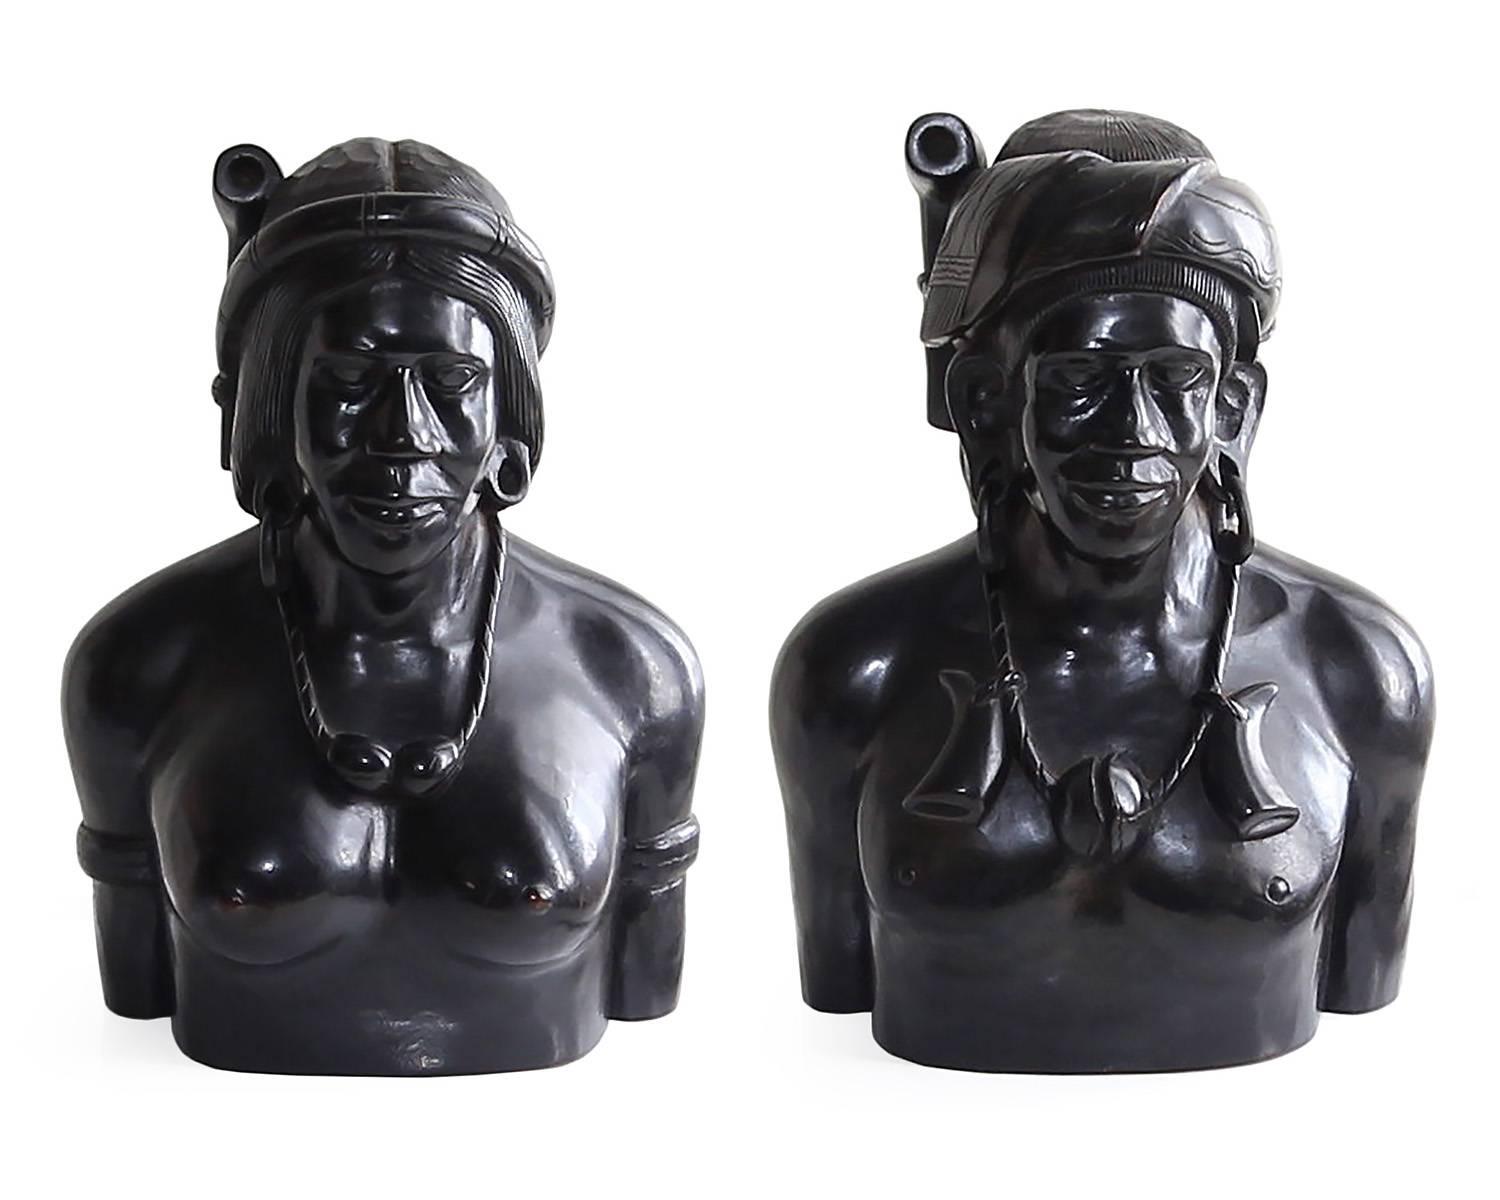 This pair of hand-carved wooden busts are truly a special find and a magnificent example of folk tribal art. Care and craftsmanship are clearly evident in these pieces as facial features, jewelry and hair are all careful executed. A dark, rich